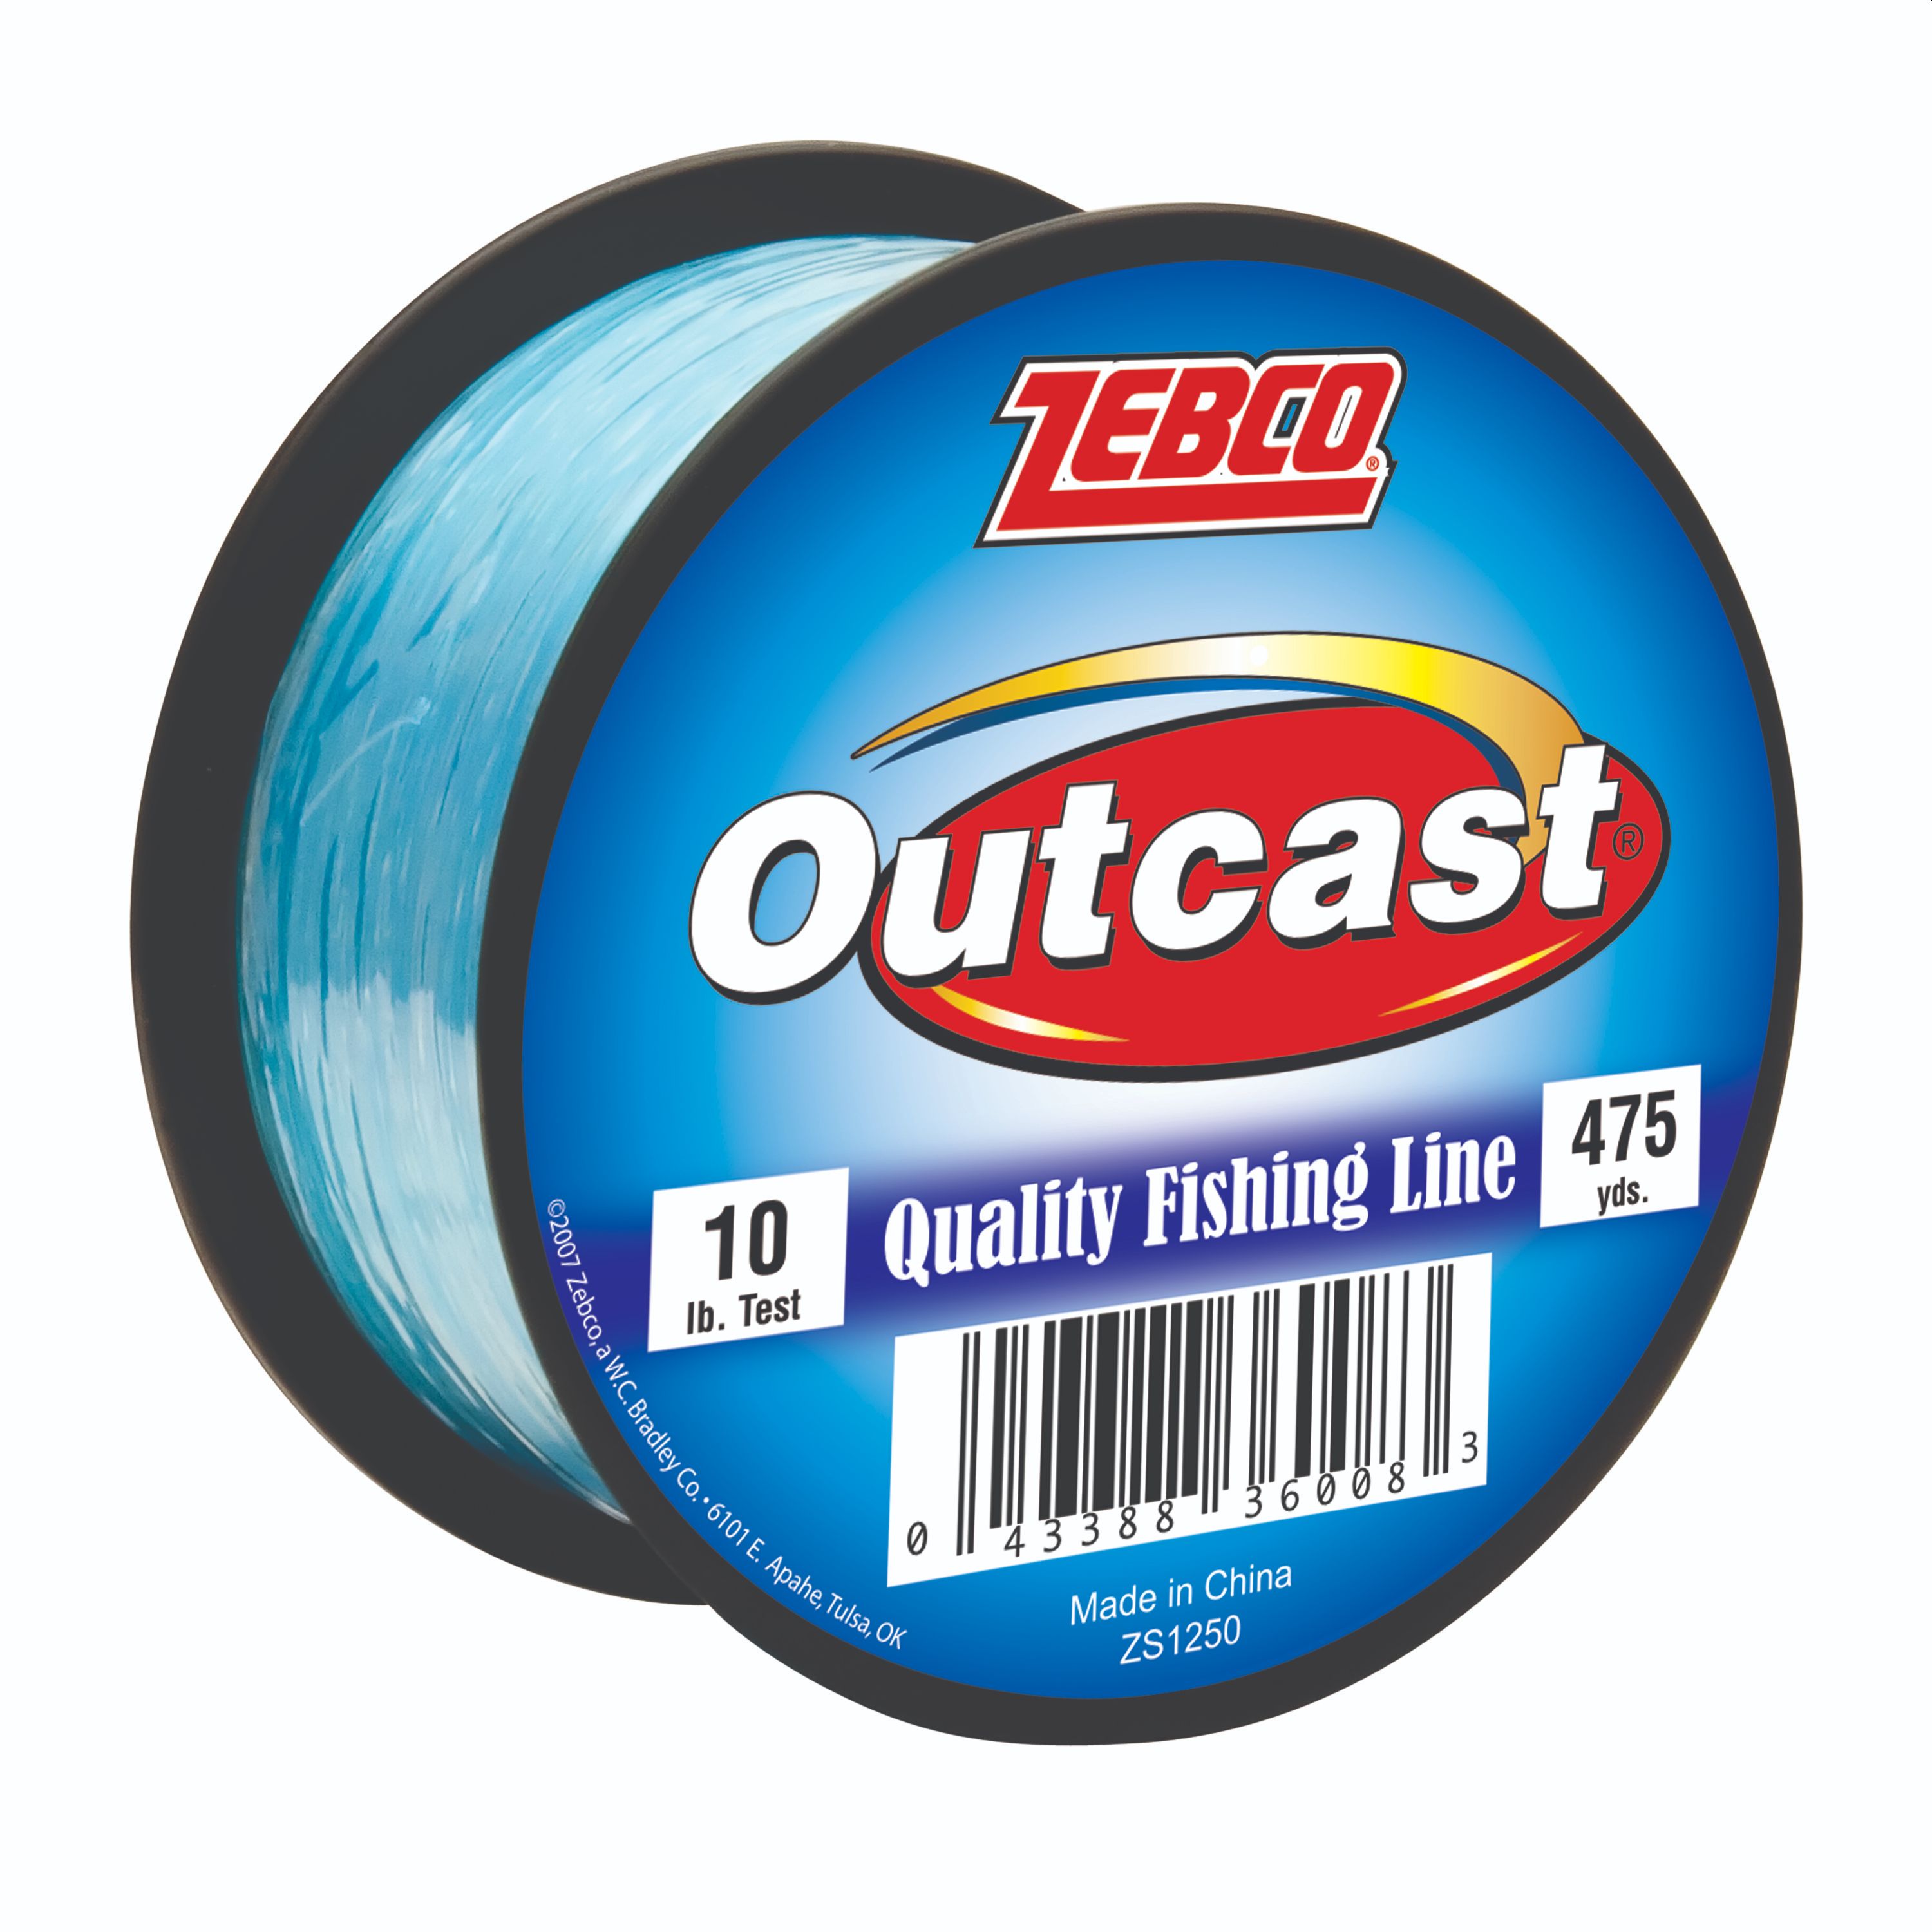 Zebco 21-10014 Outcast 10-Pound, 475-Yard, Blue Fishing Line at Sutherlands